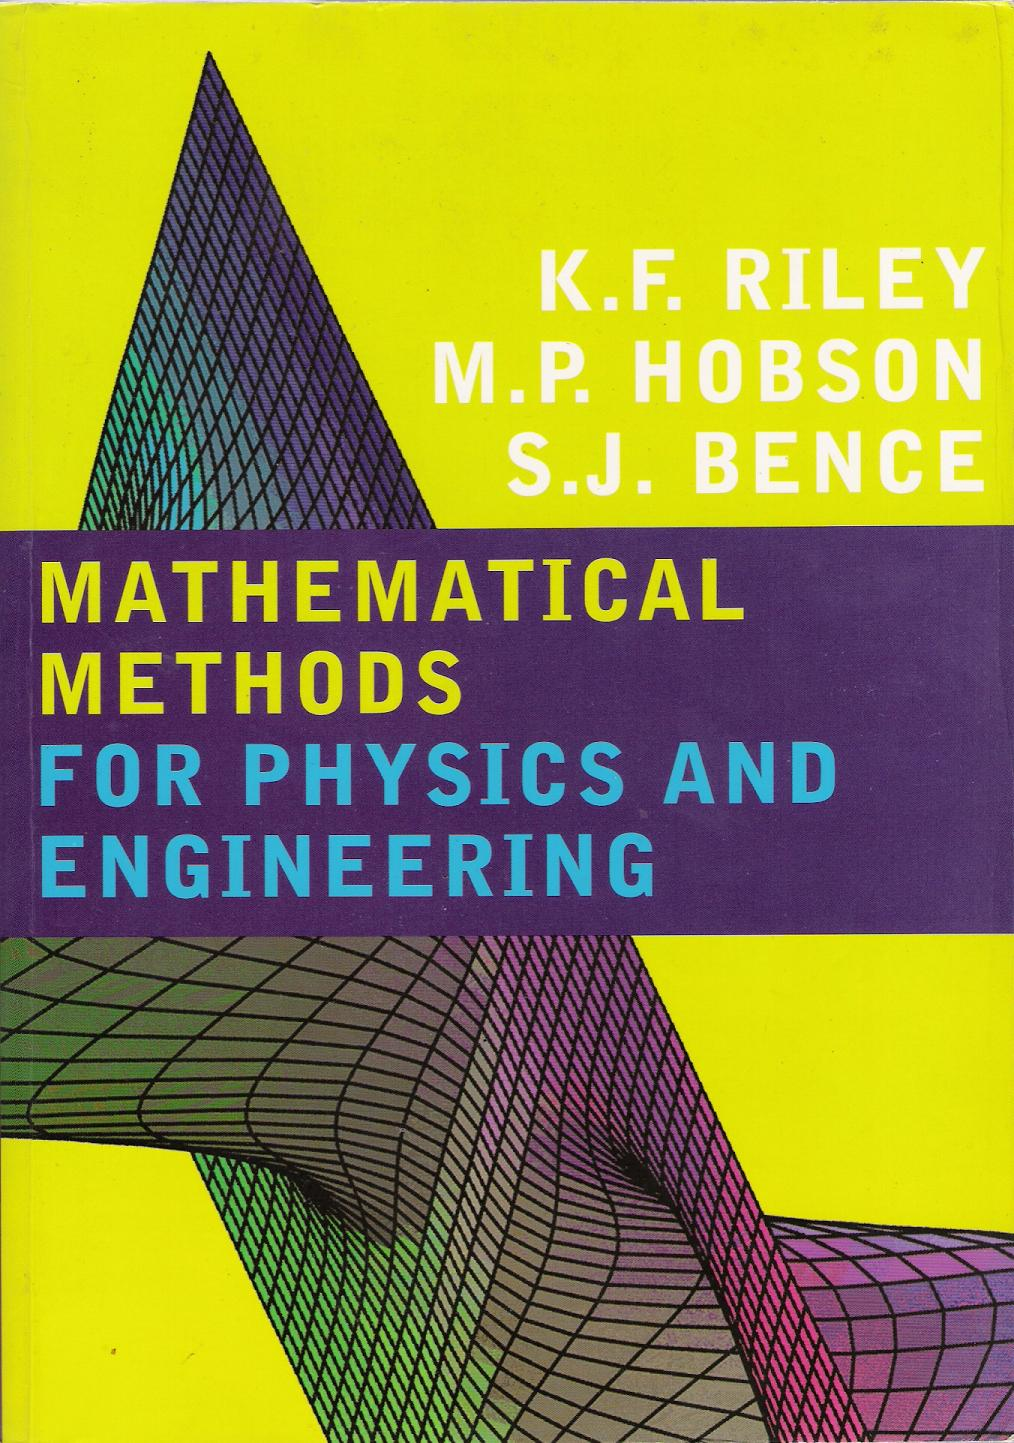 Portada del Mathematical Methods for Physics and Engineering (de K. F. Riley, M. P. Hobson y S. J. Benson)